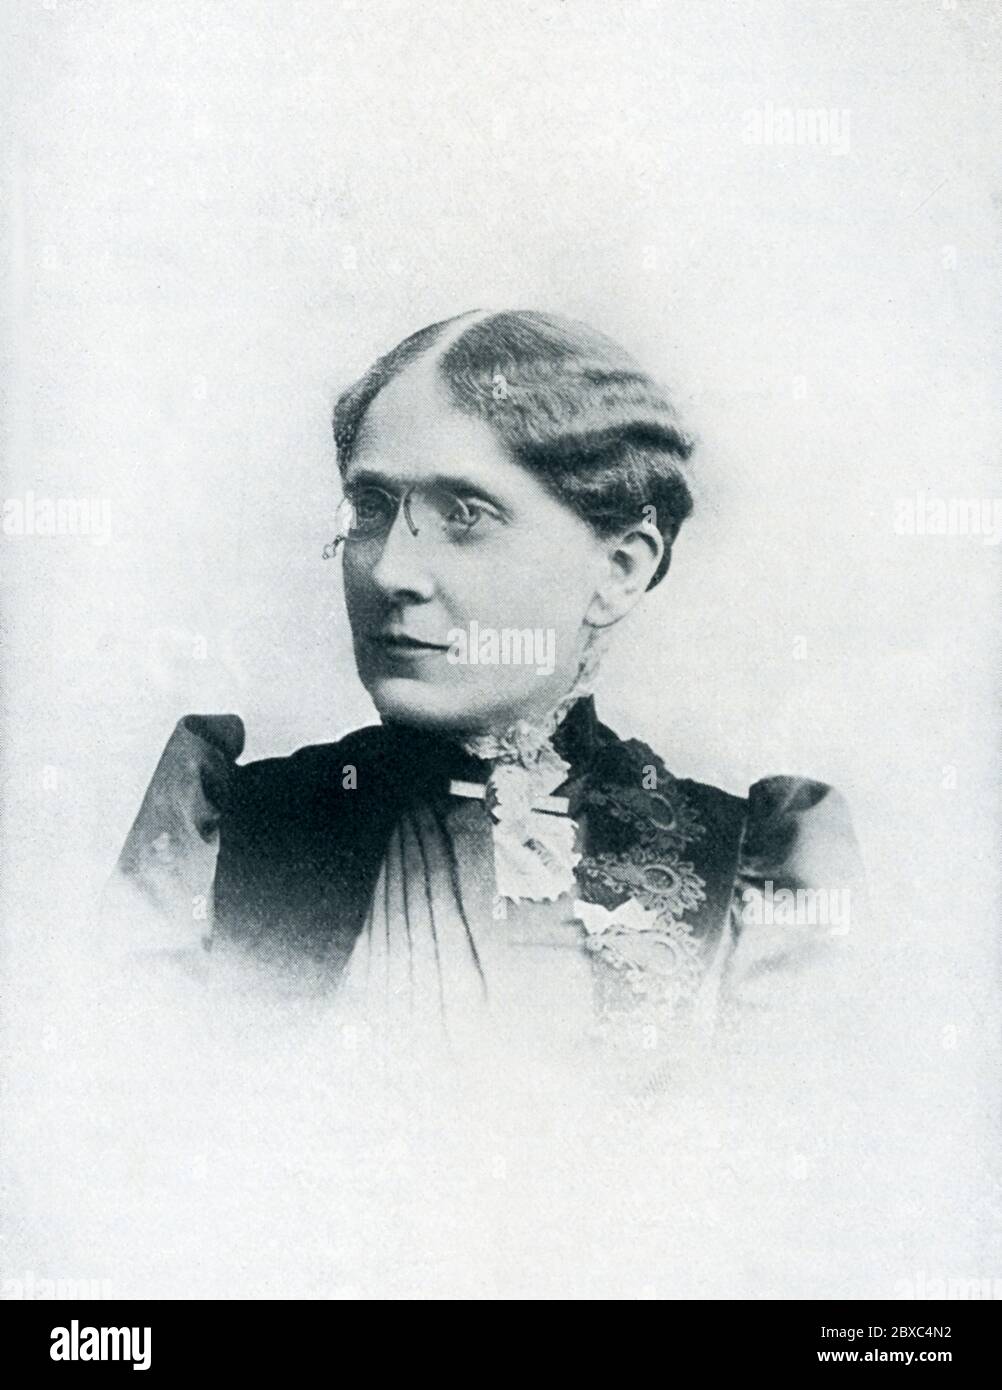 Frances Elizabeth Caroline Willard (1839 –1898) was an  American educator, temperance reformer, and women's suffragist. Willard became the national president of Woman's Christian Temperance Union (WCTU) in 1879, and remained president until her death in 1898. Stock Photo